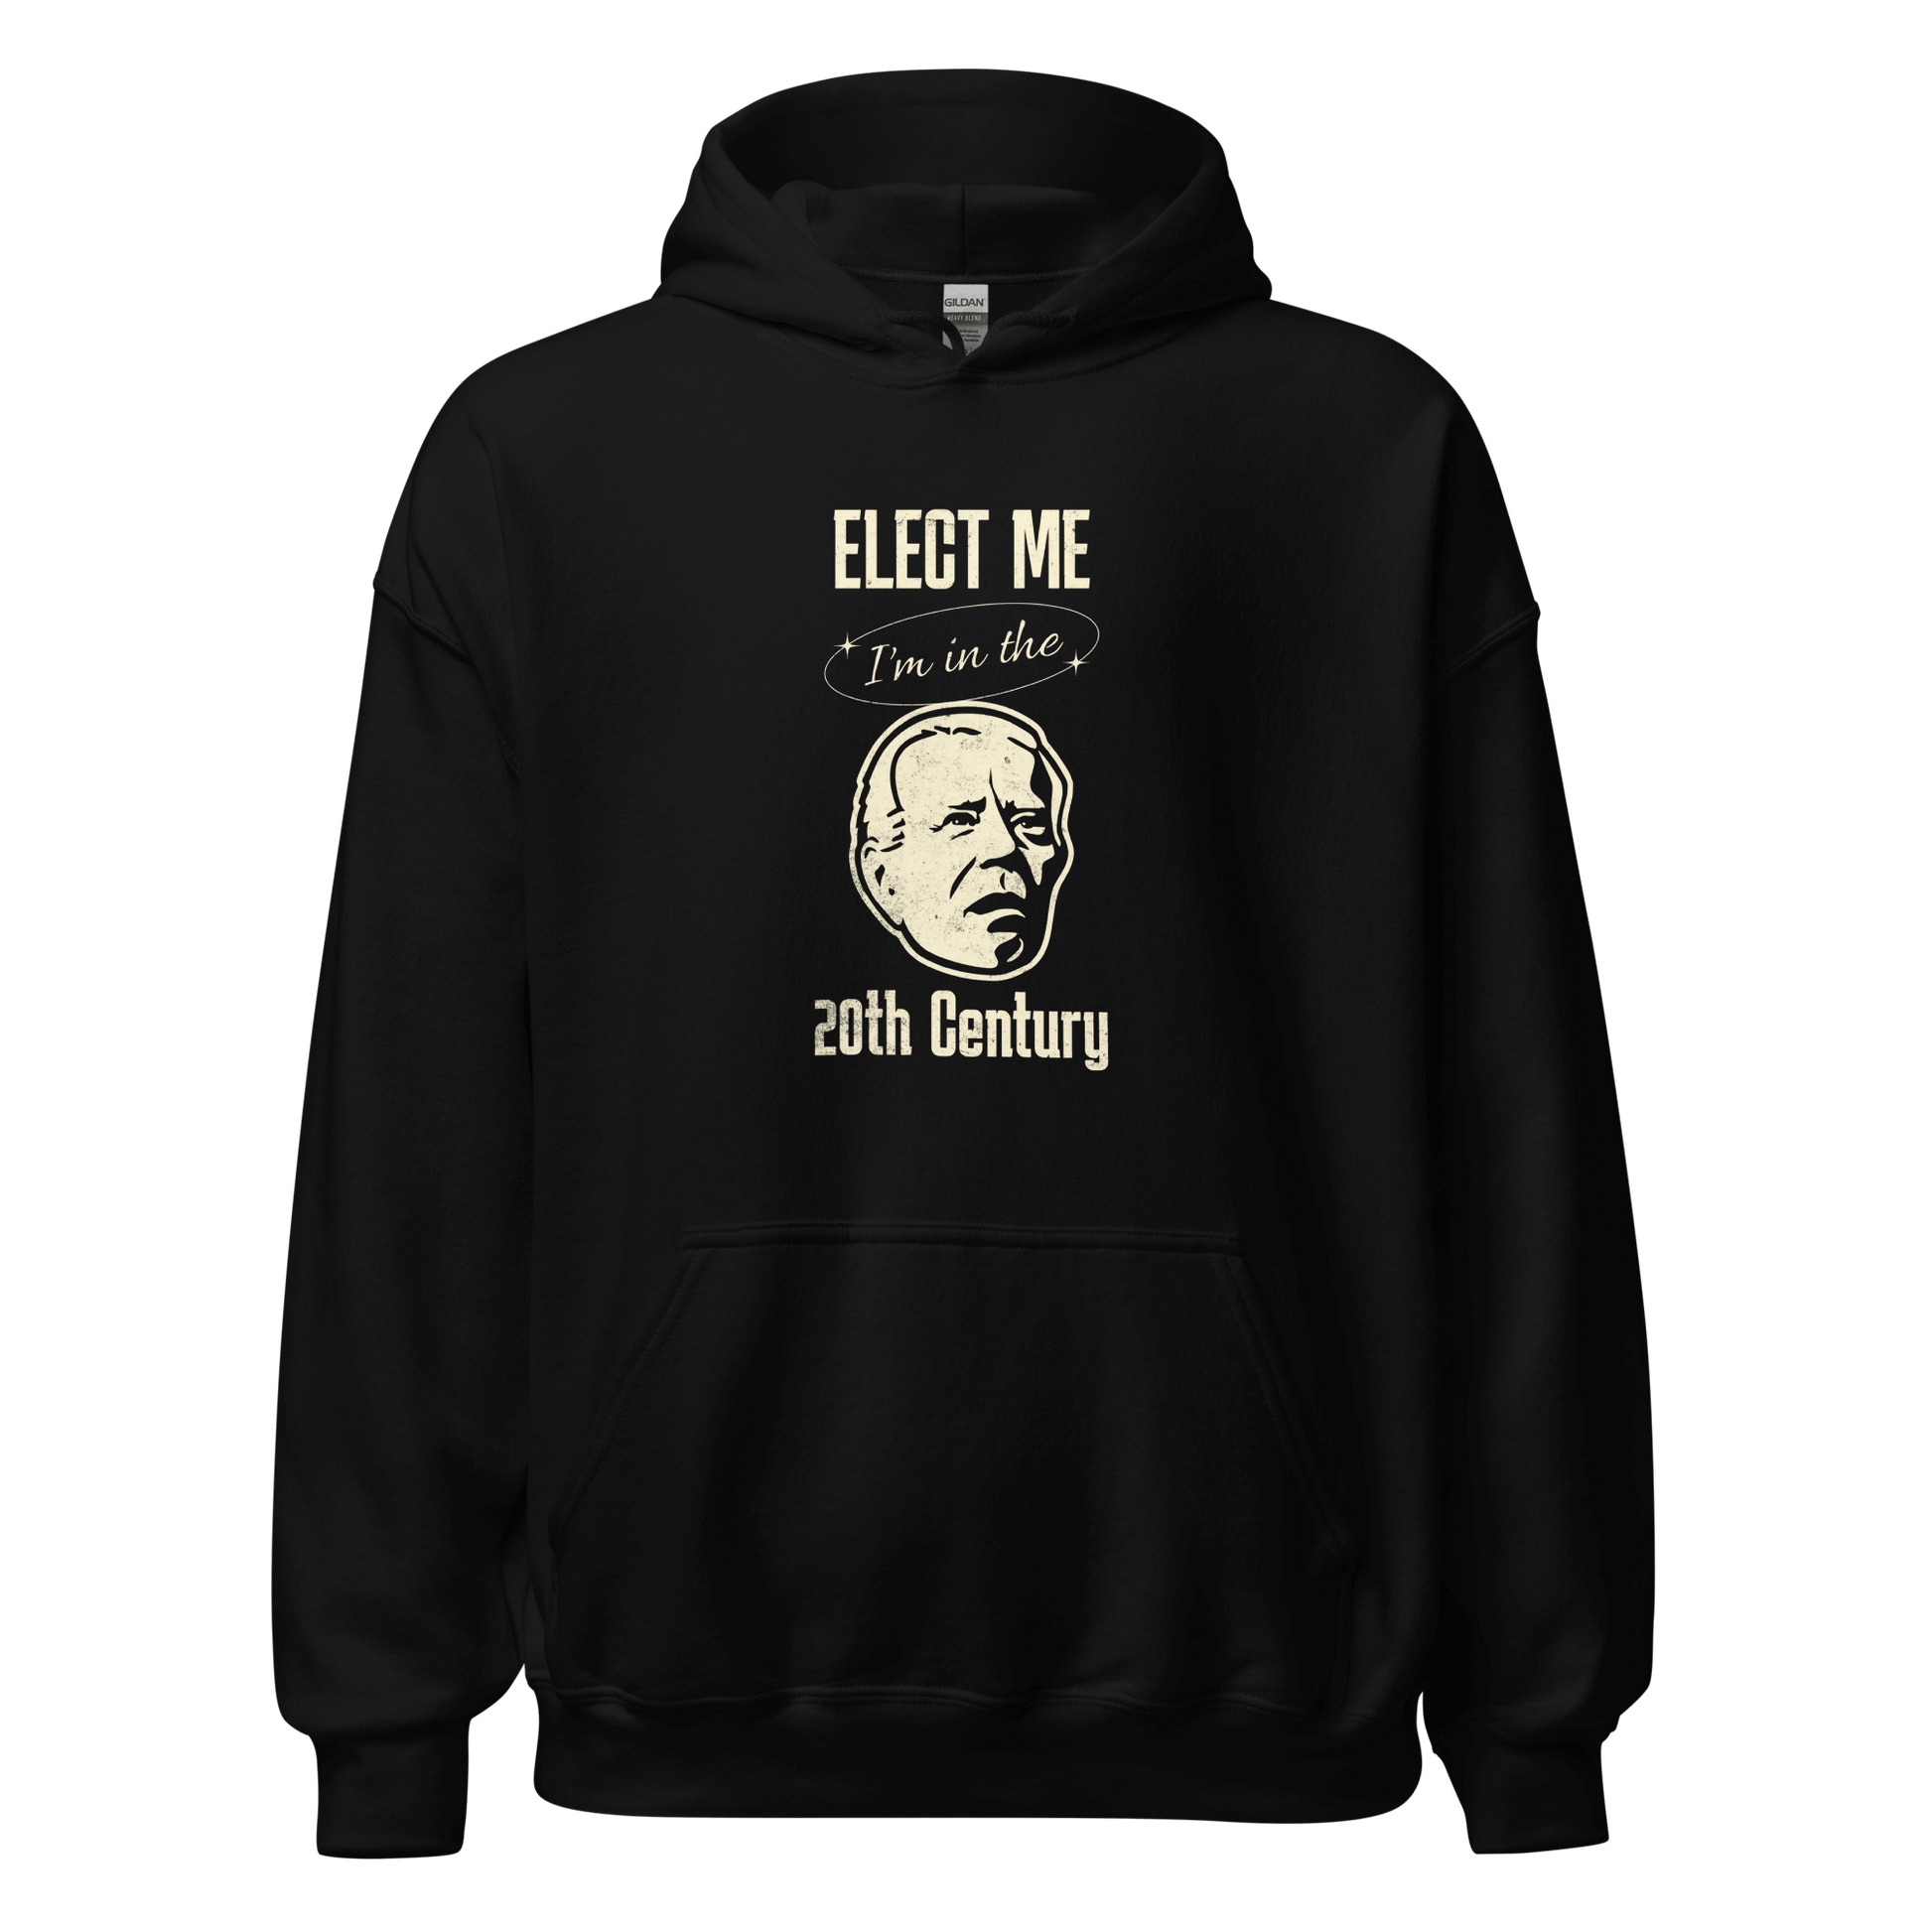 Elect Me I'm in the 20th Century Hoodie | Soft & Stylish FUNNY PRESIDENT,HOODIE,MENS,New,UNISEX,WOMENS Dayzzed Apparel